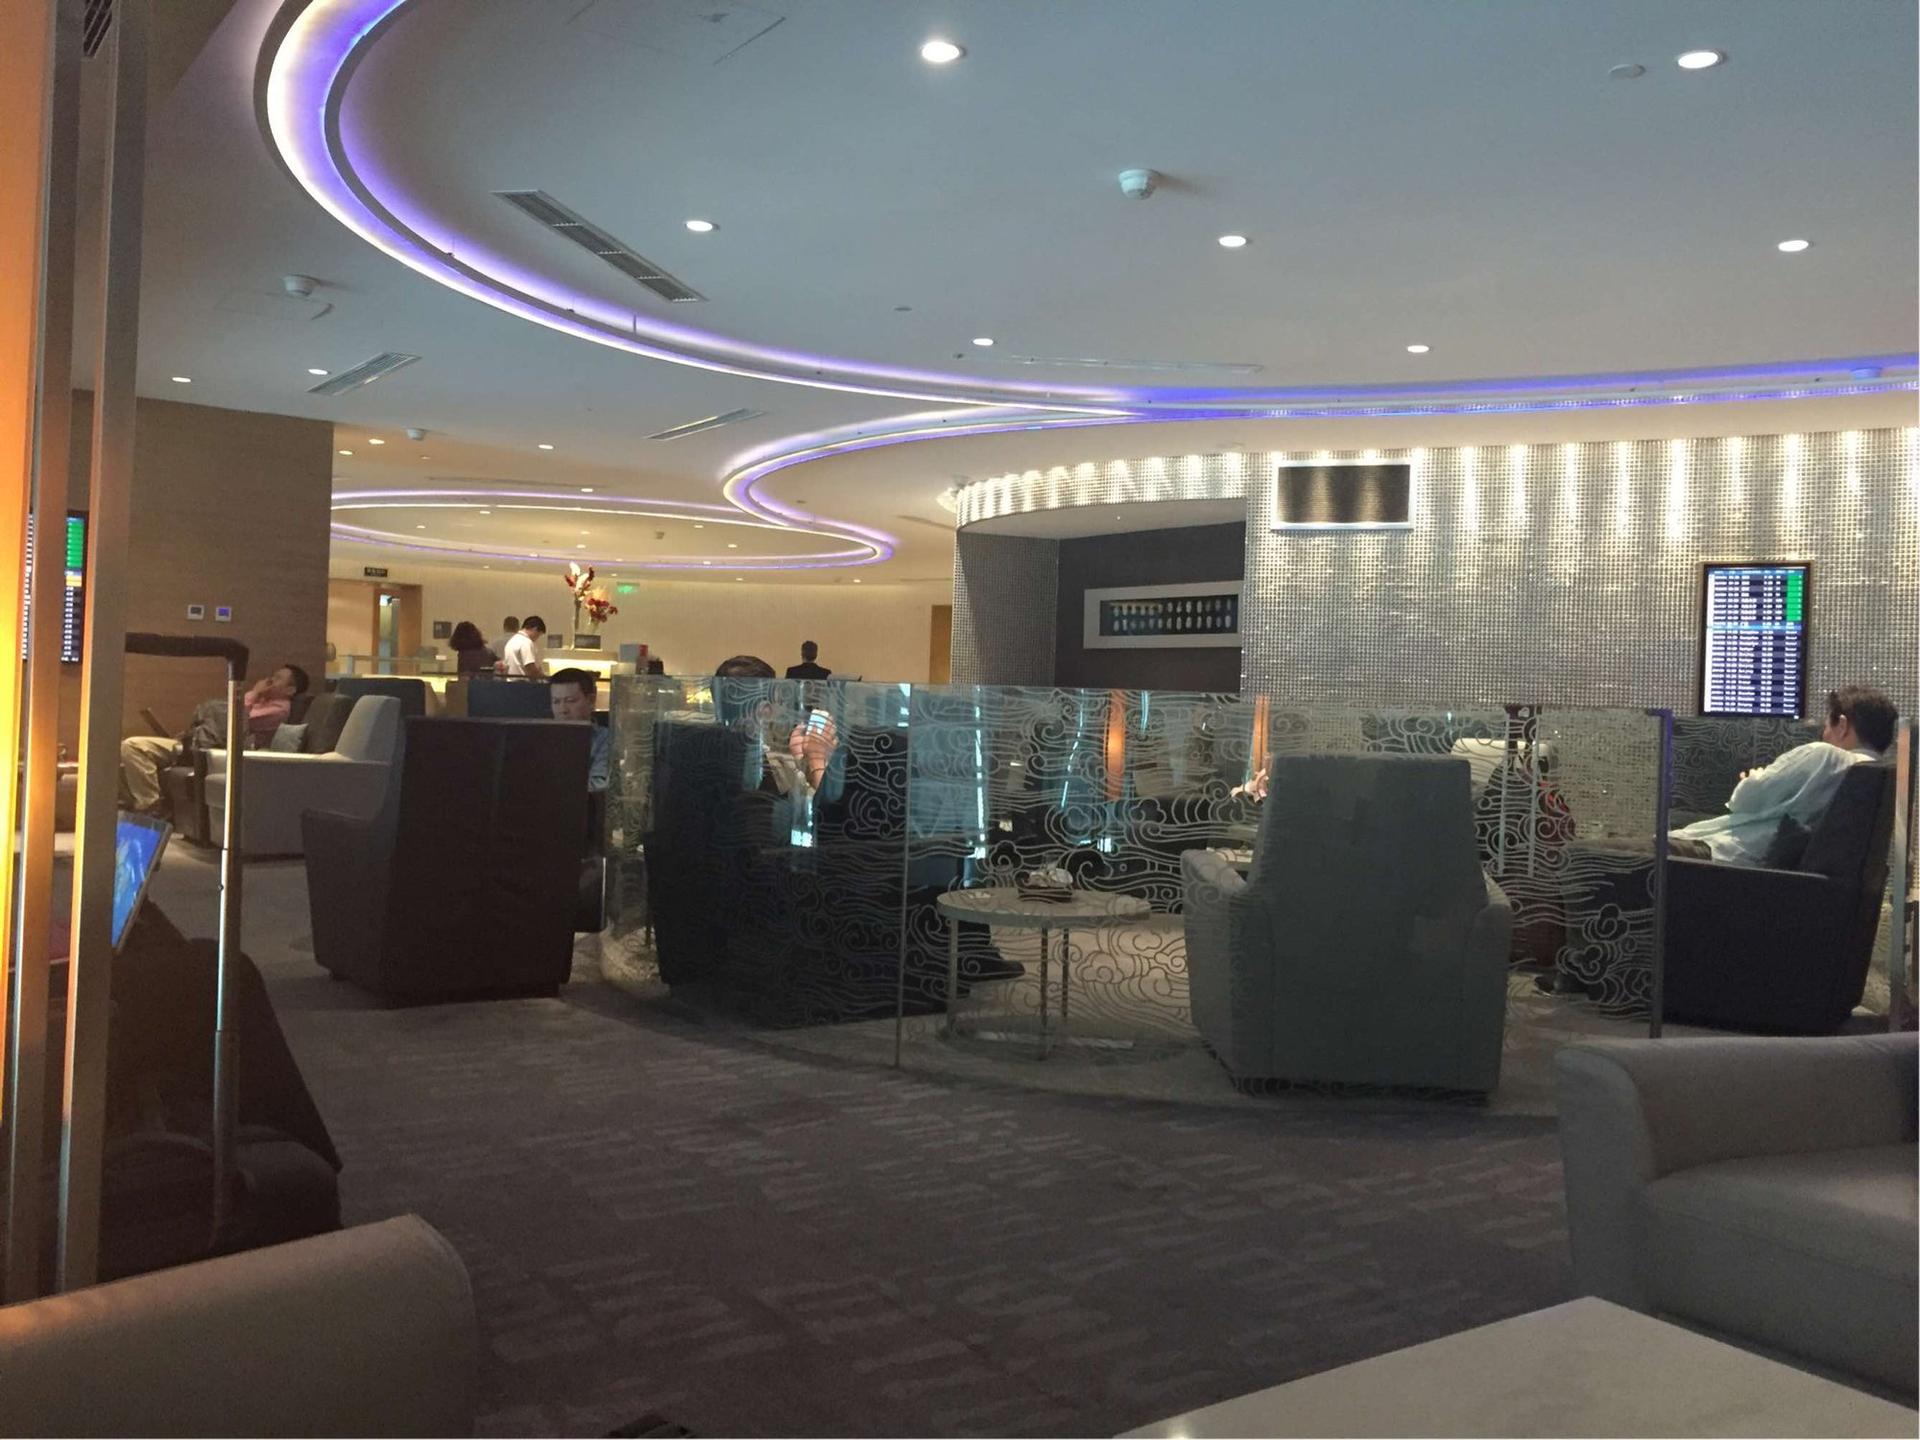 Air China Domestic First & Business Class Lounge image 4 of 5